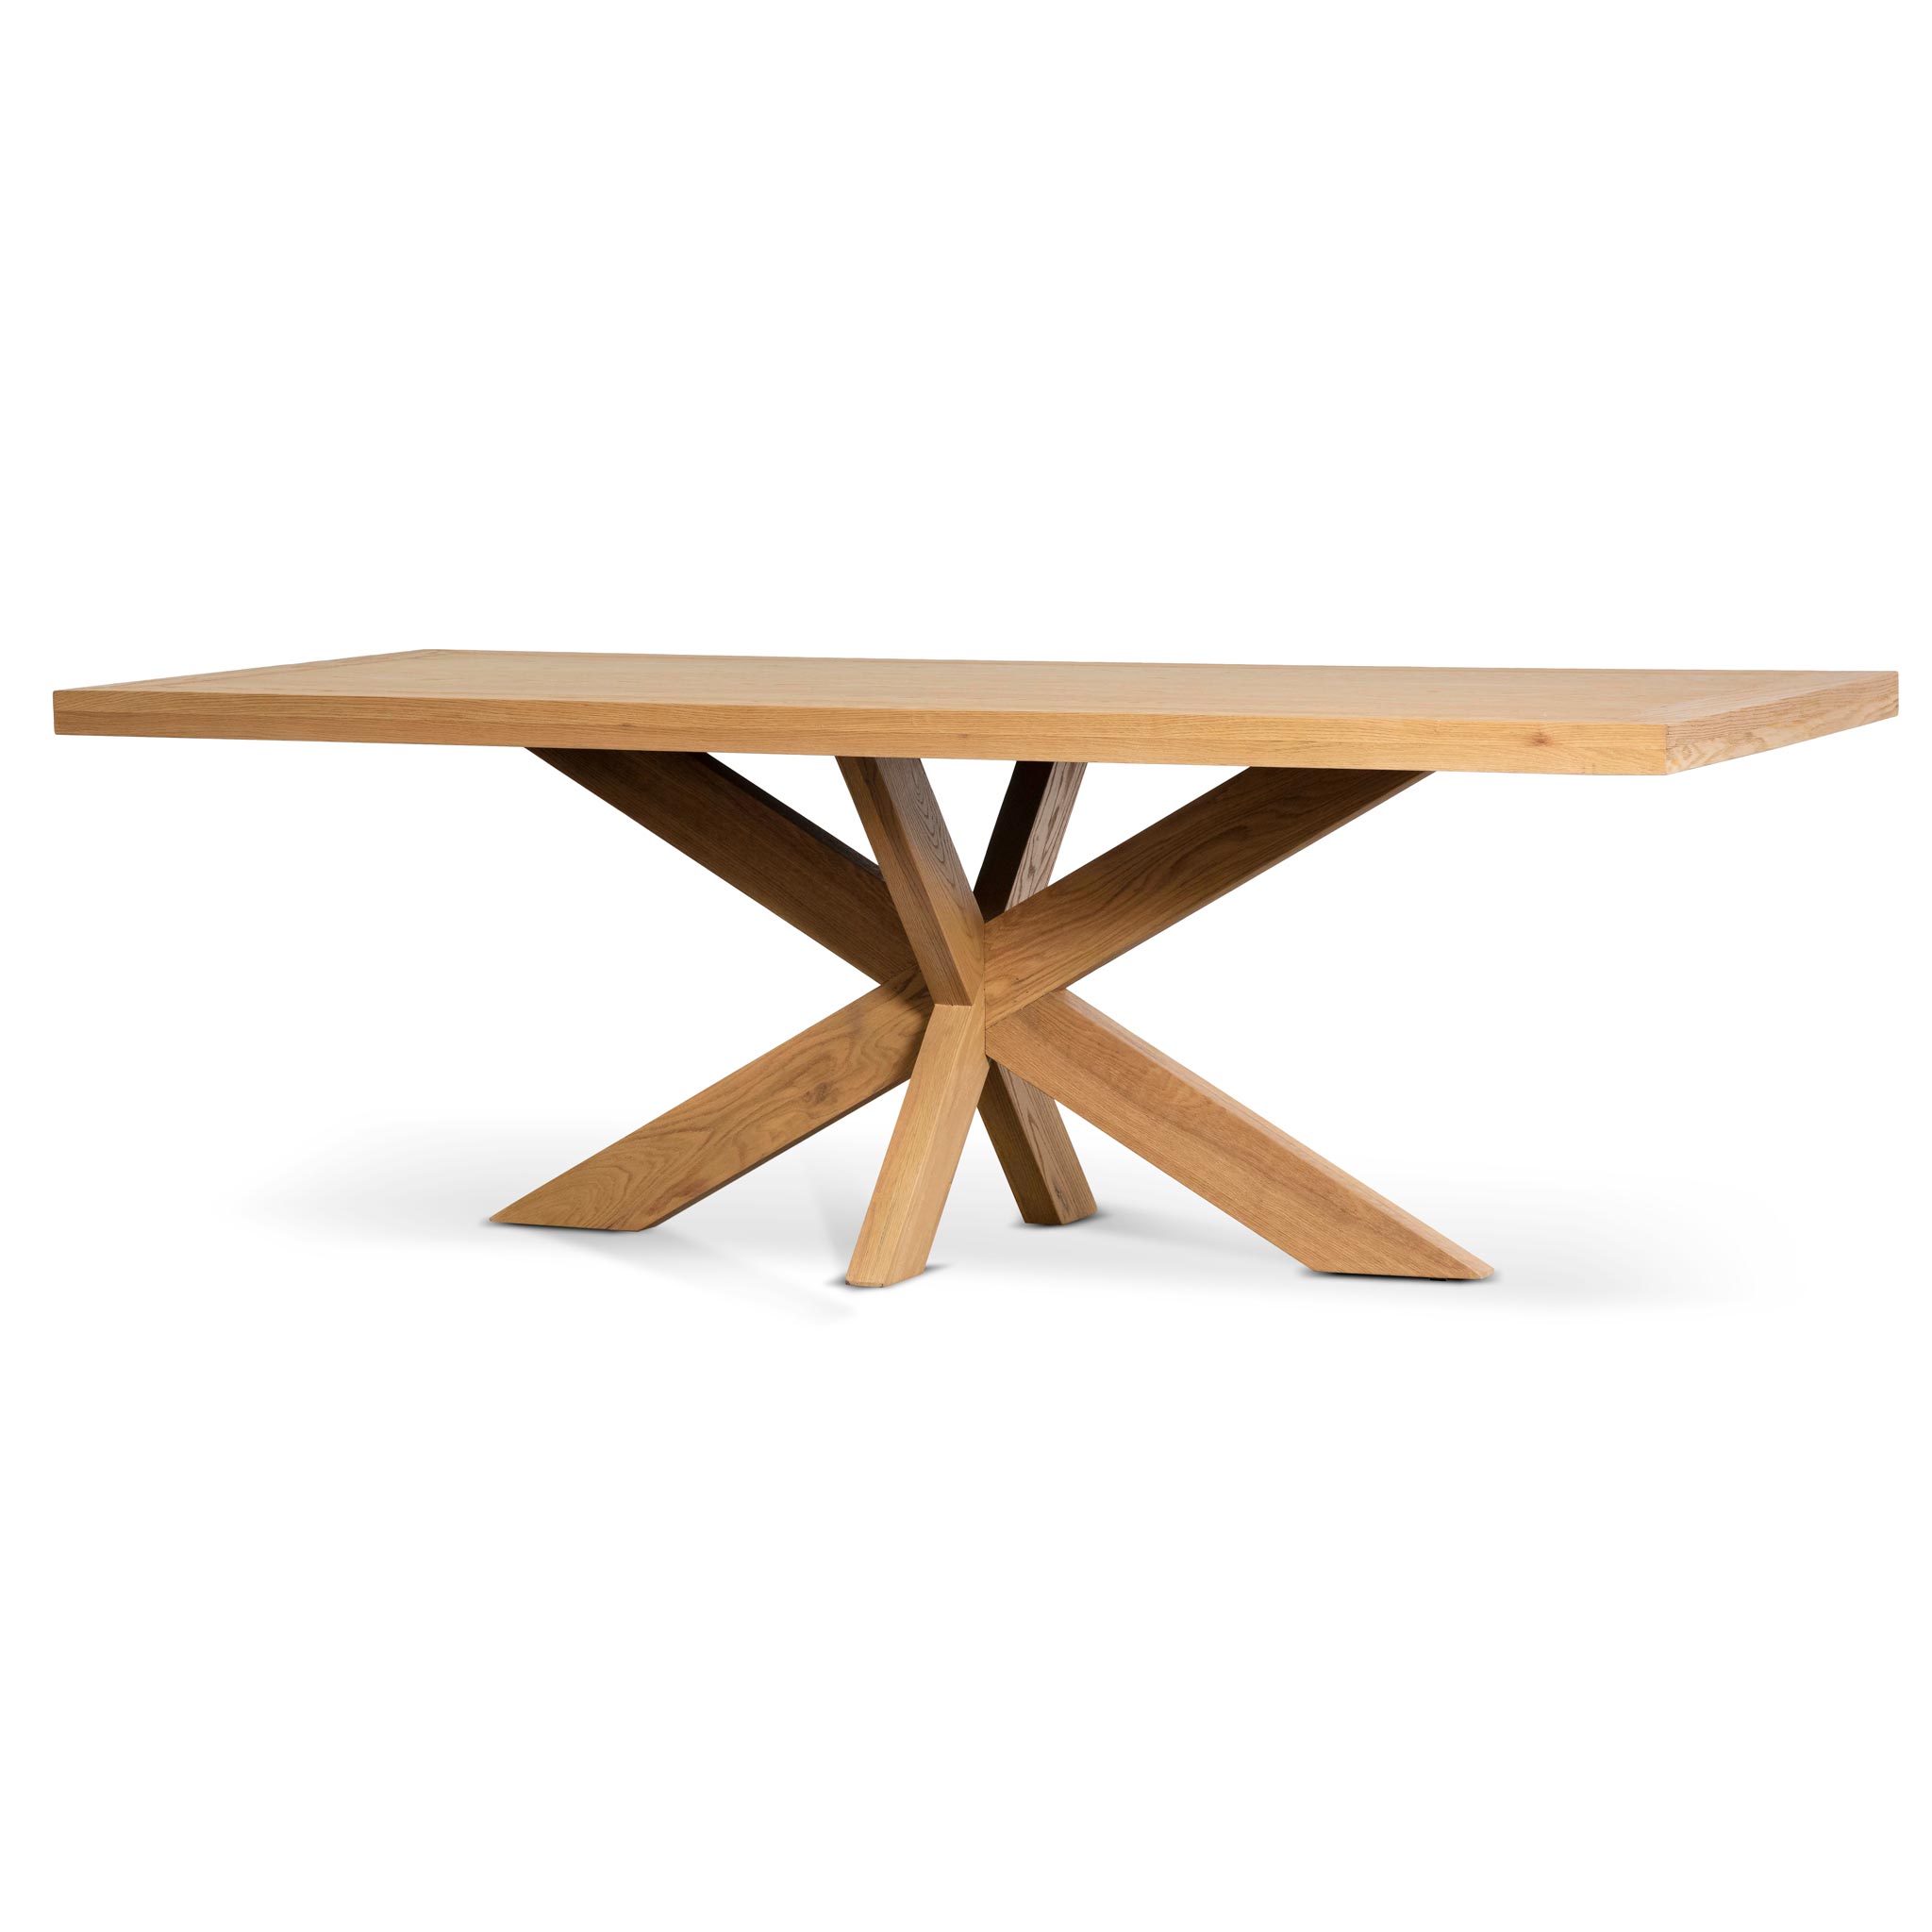 Amazon 2.2m Wooden Dining Table - Distress Natural - Dining Tables